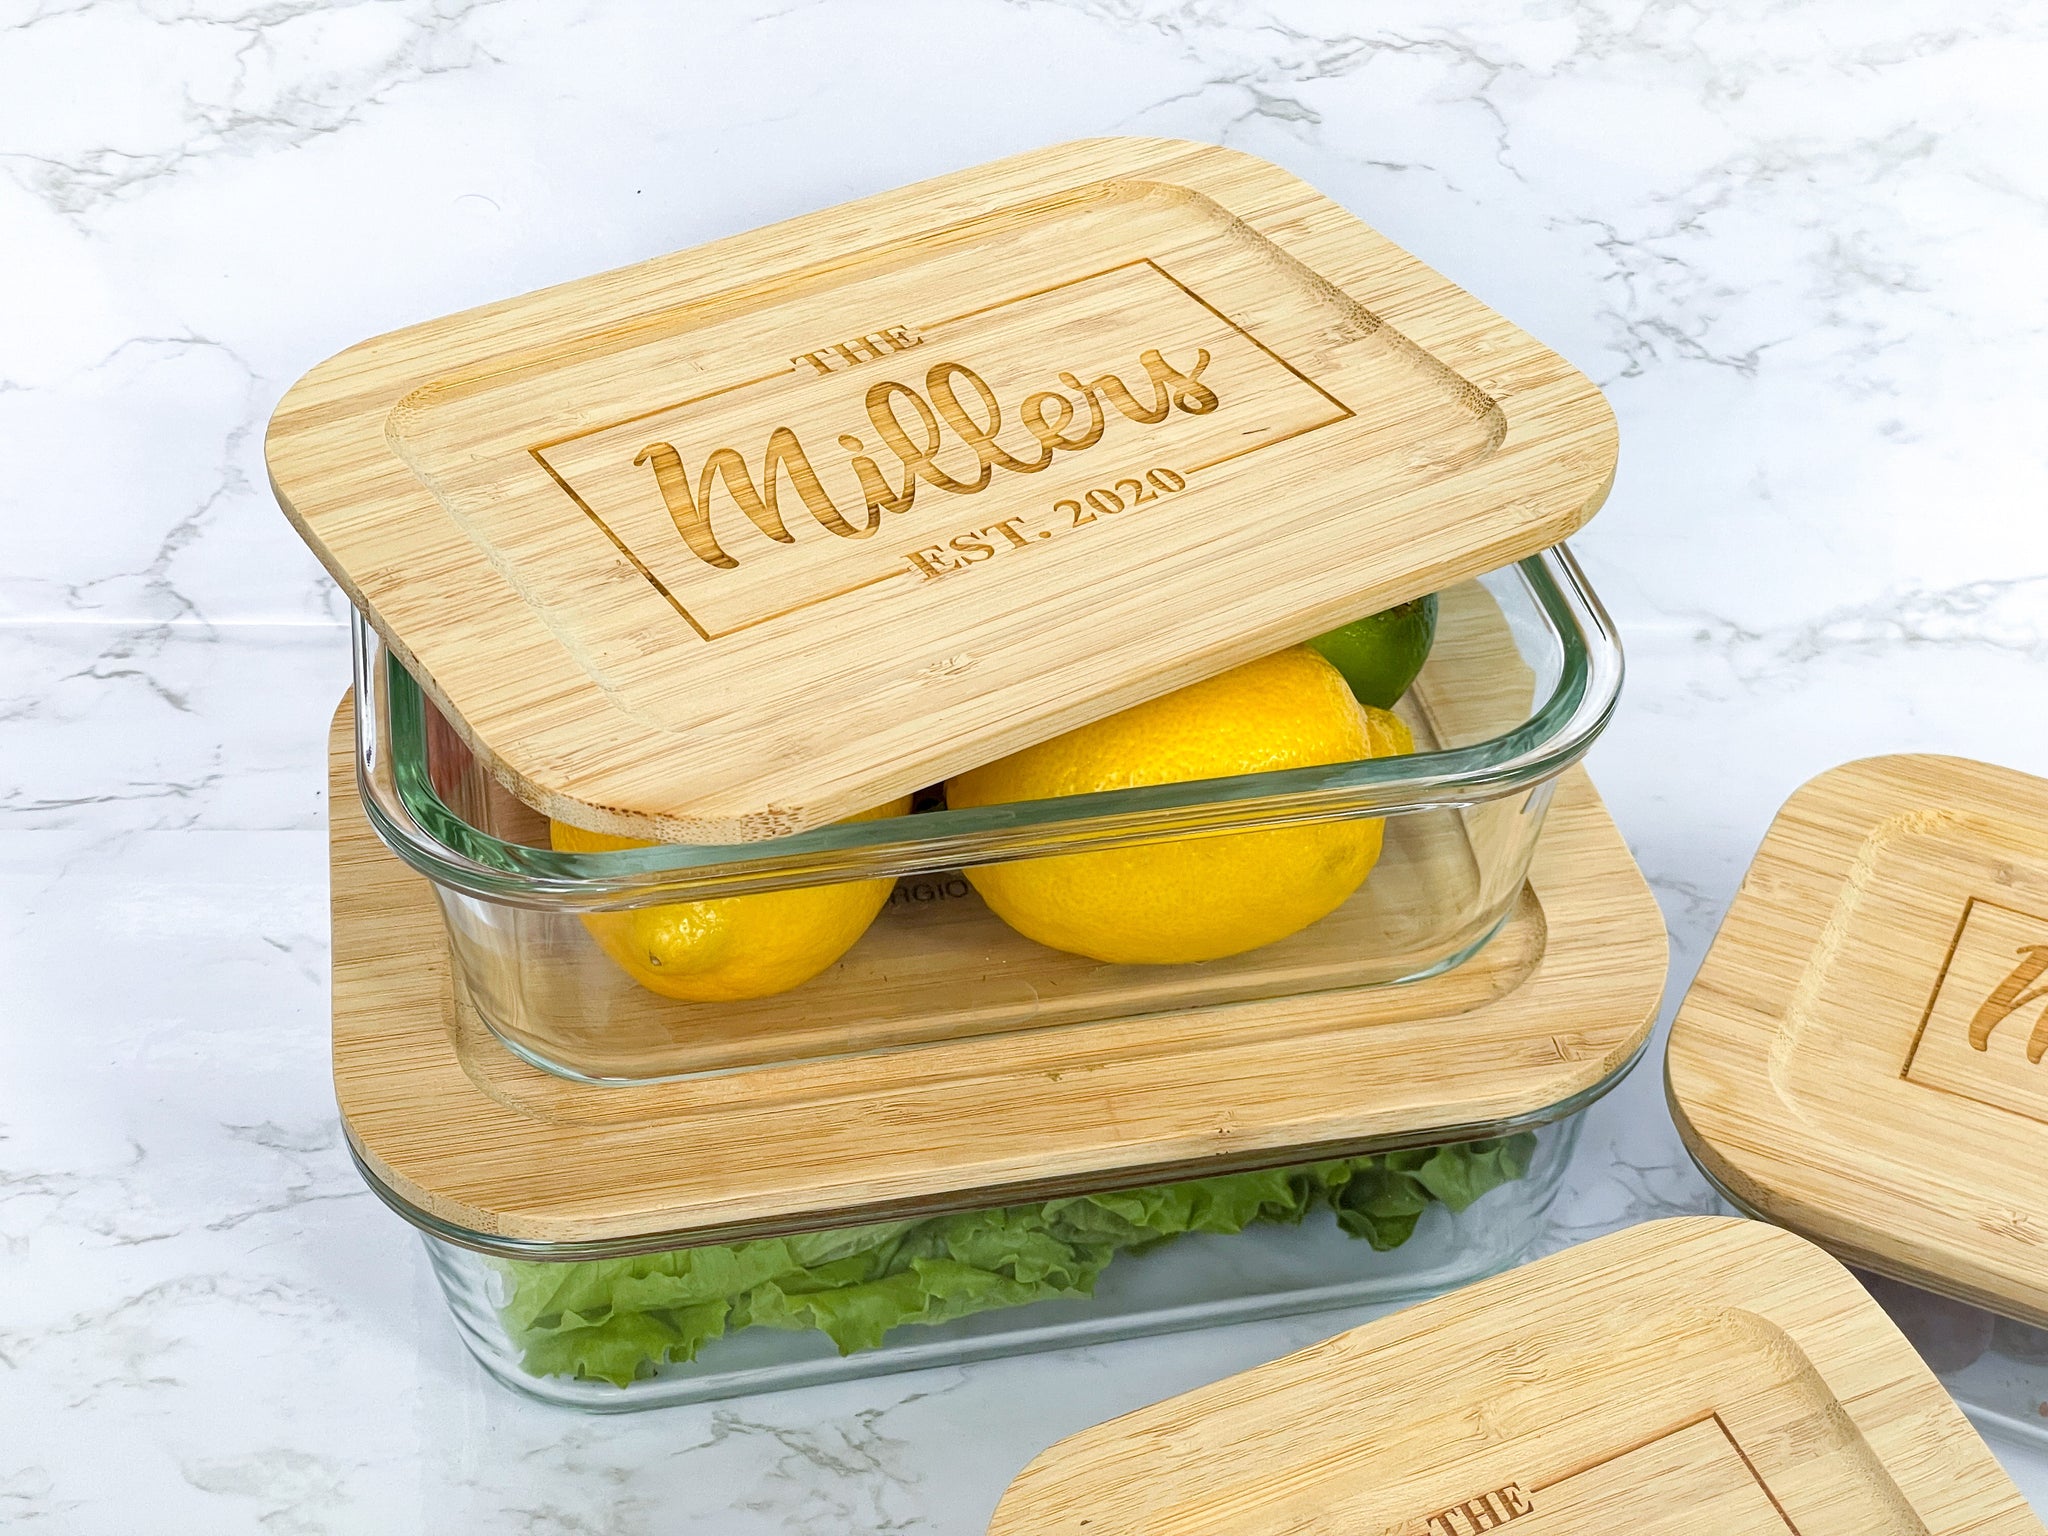 Live Bamboo Premium Round Glass Storage Containers with Bamboo Lids for Meal  Prep - Customized Glass Food Containers & Mug & Bowls Manufacturer .